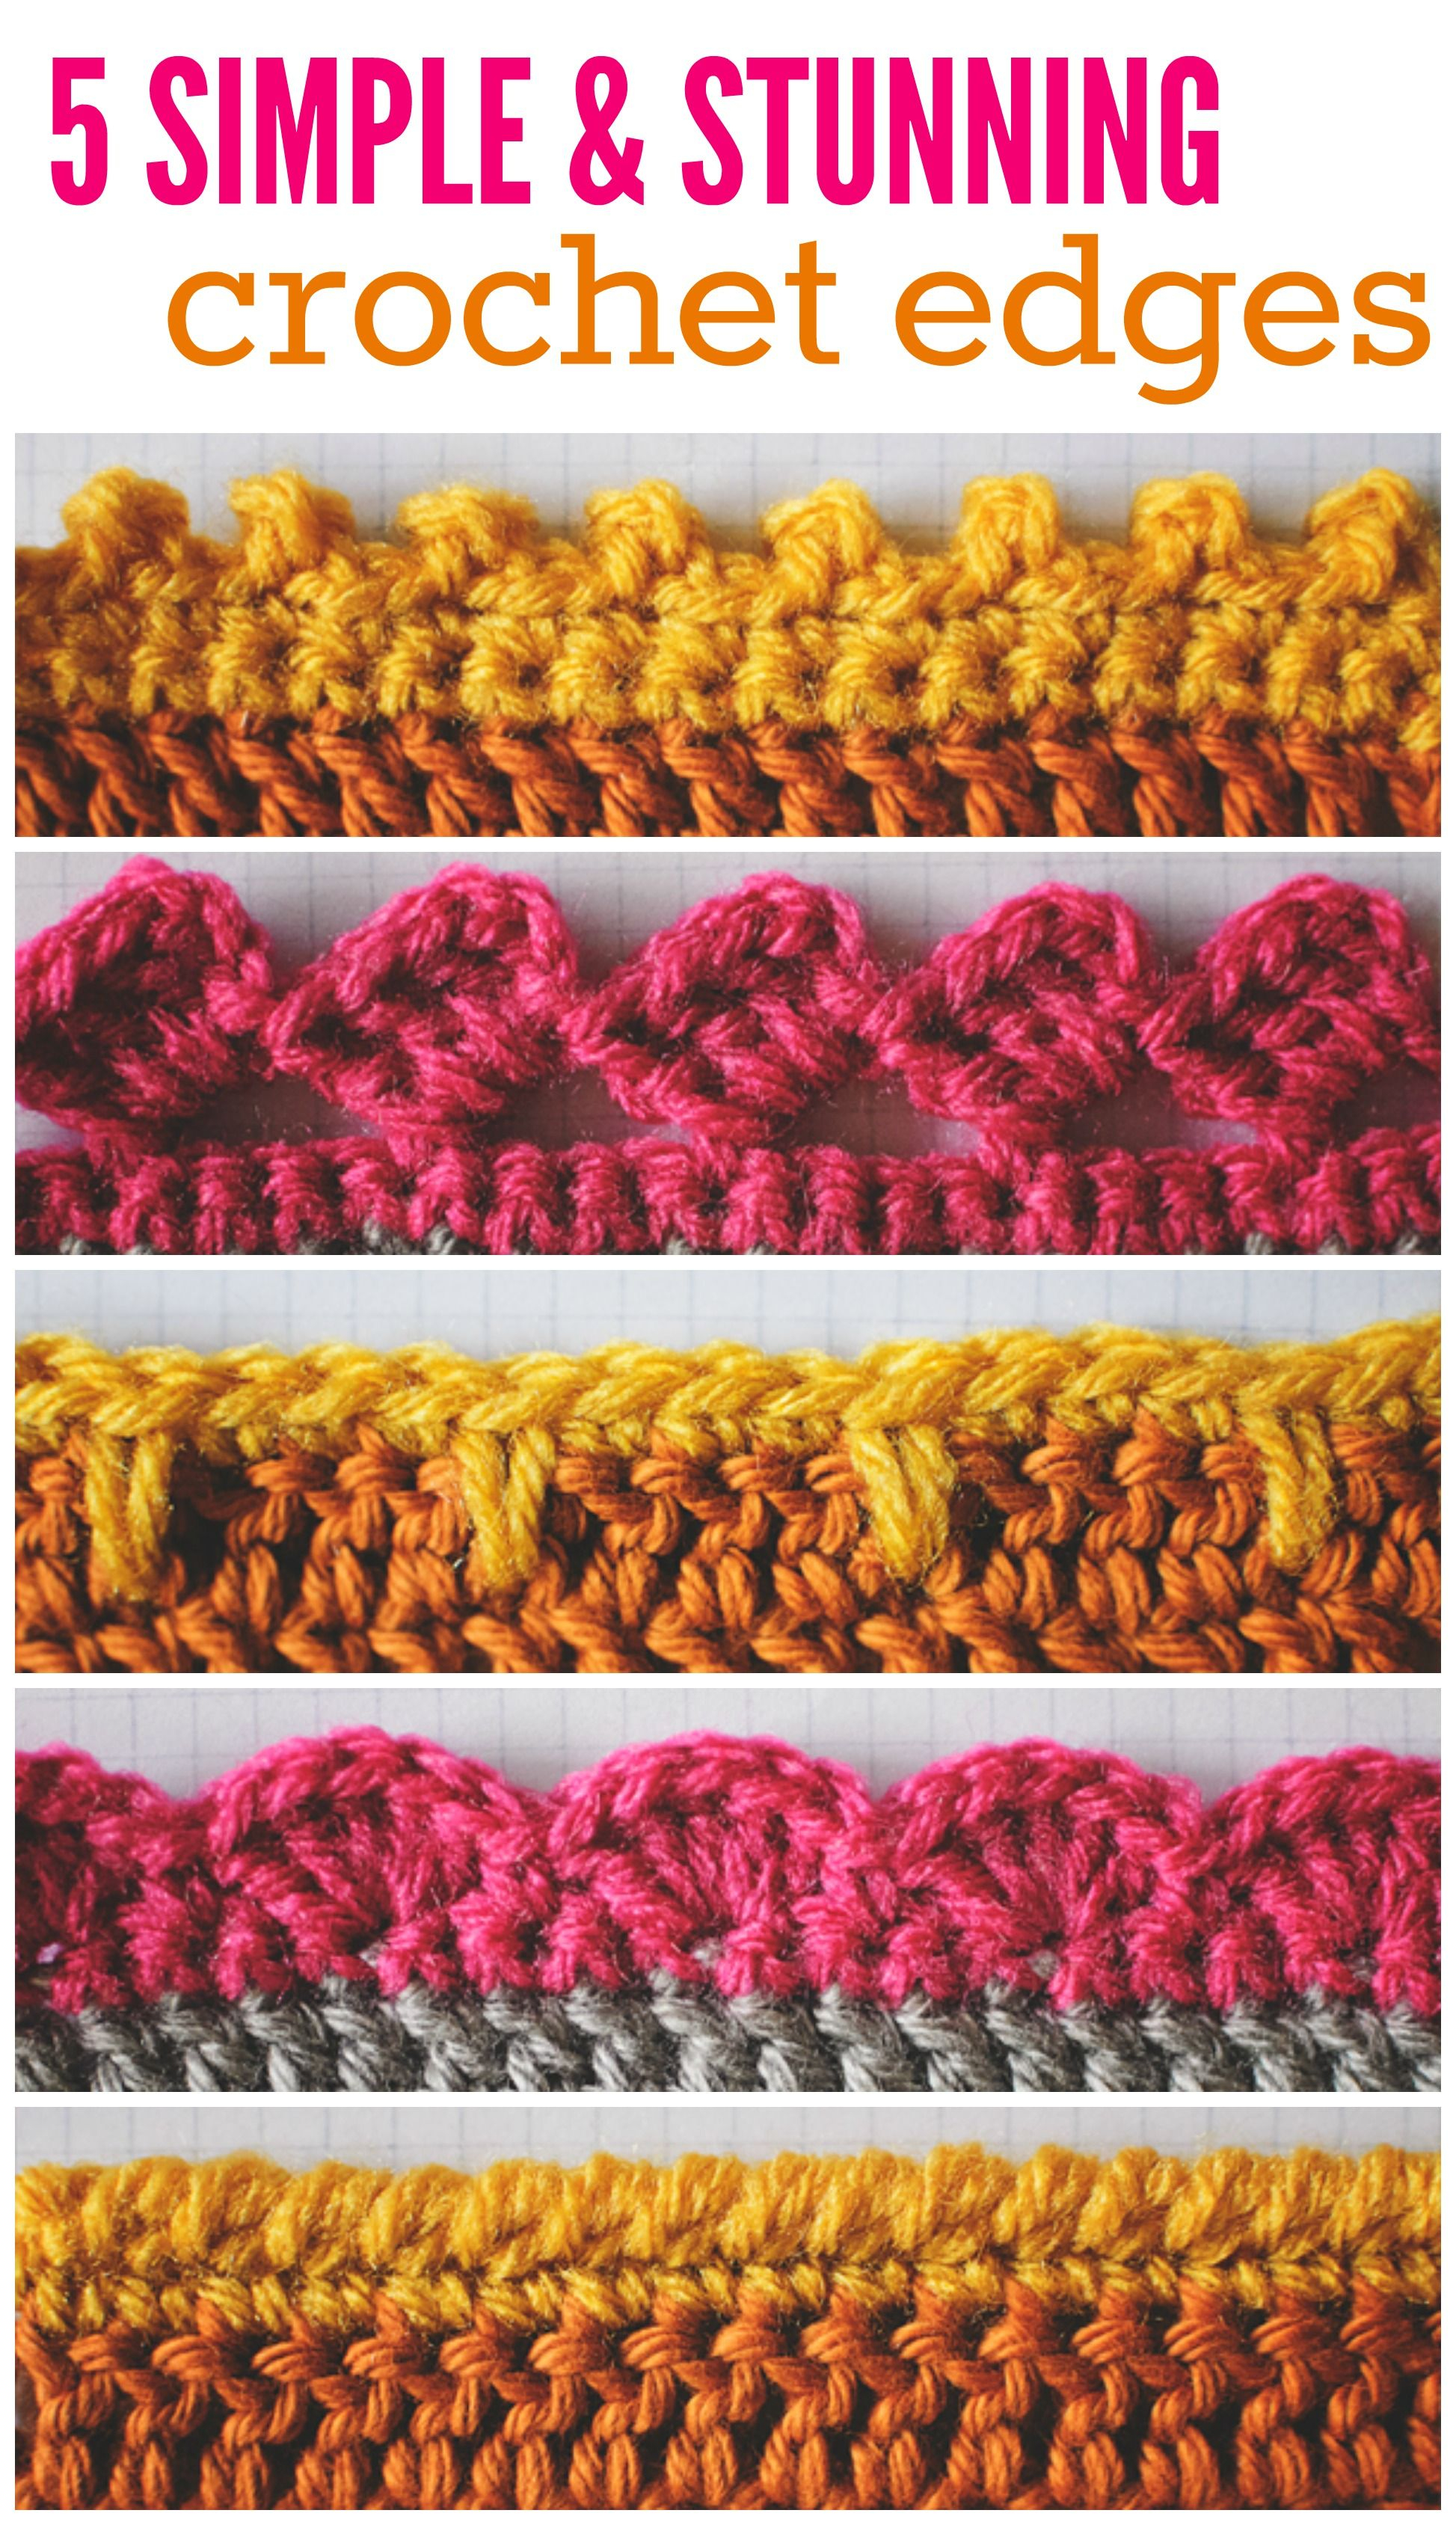 Crochet Trim Patterns 5 Crochet Edges To Have In Your Arsenal We Love Crochet